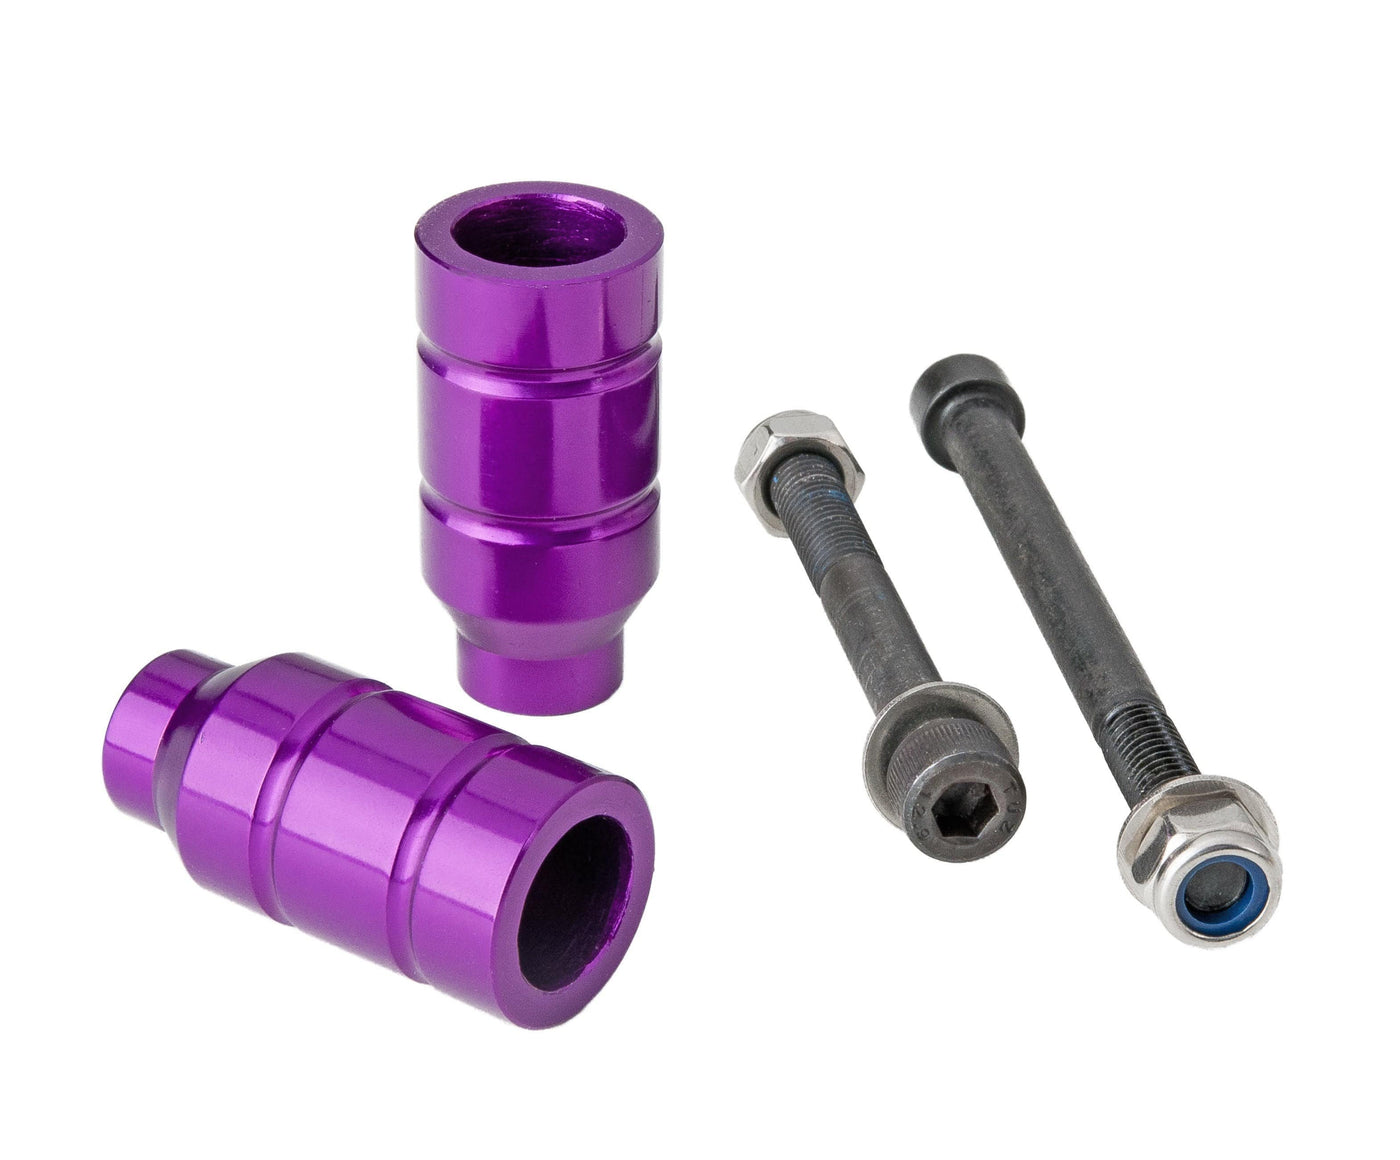 Grit Scooters Alloy Scooter Pegs - Anodized Purple Grit Scooters